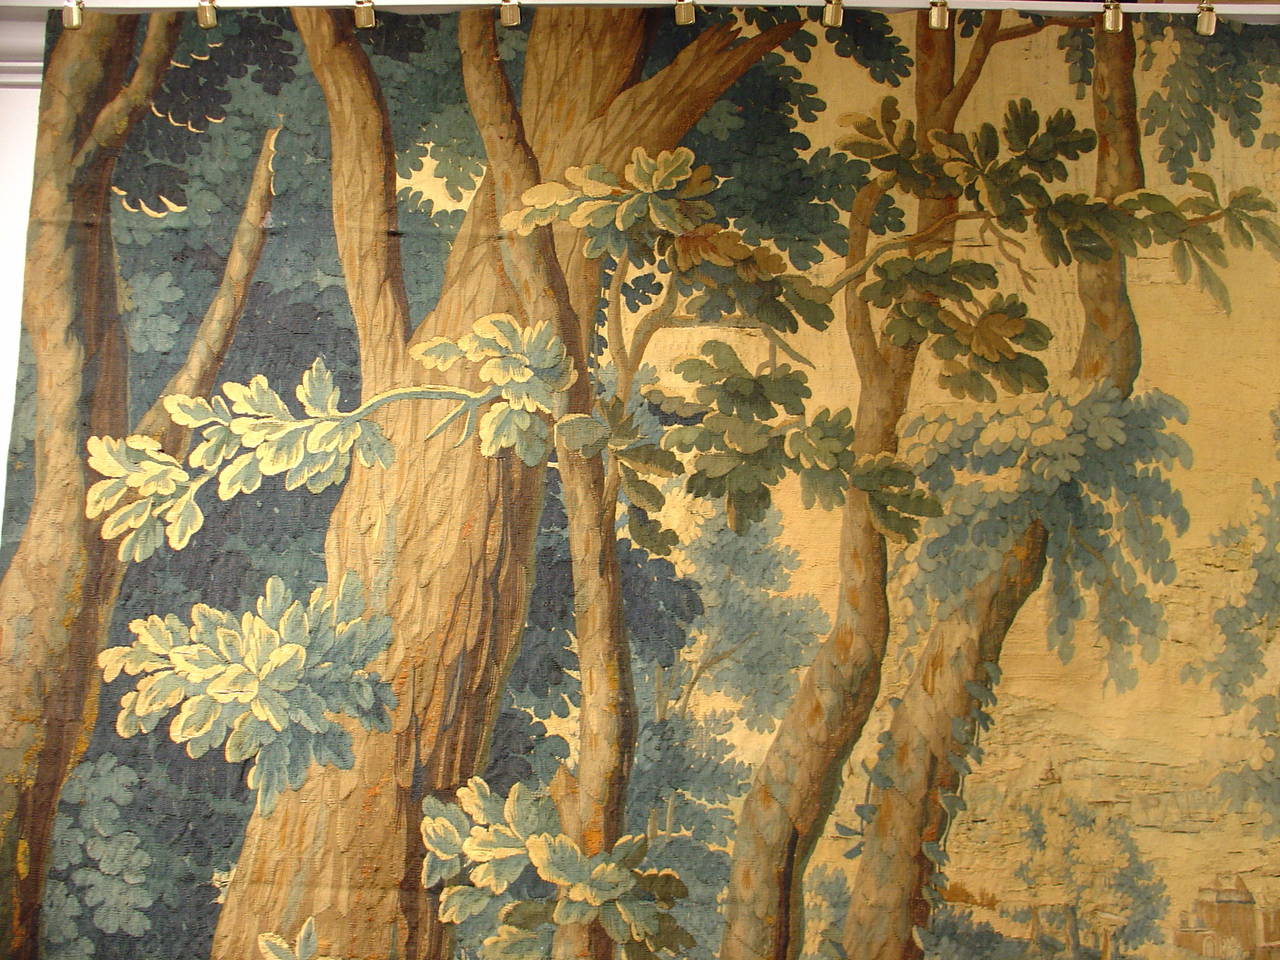 French Rare 17th Century Mythological Tapestry Depicting Diana the Huntress and Actaeon